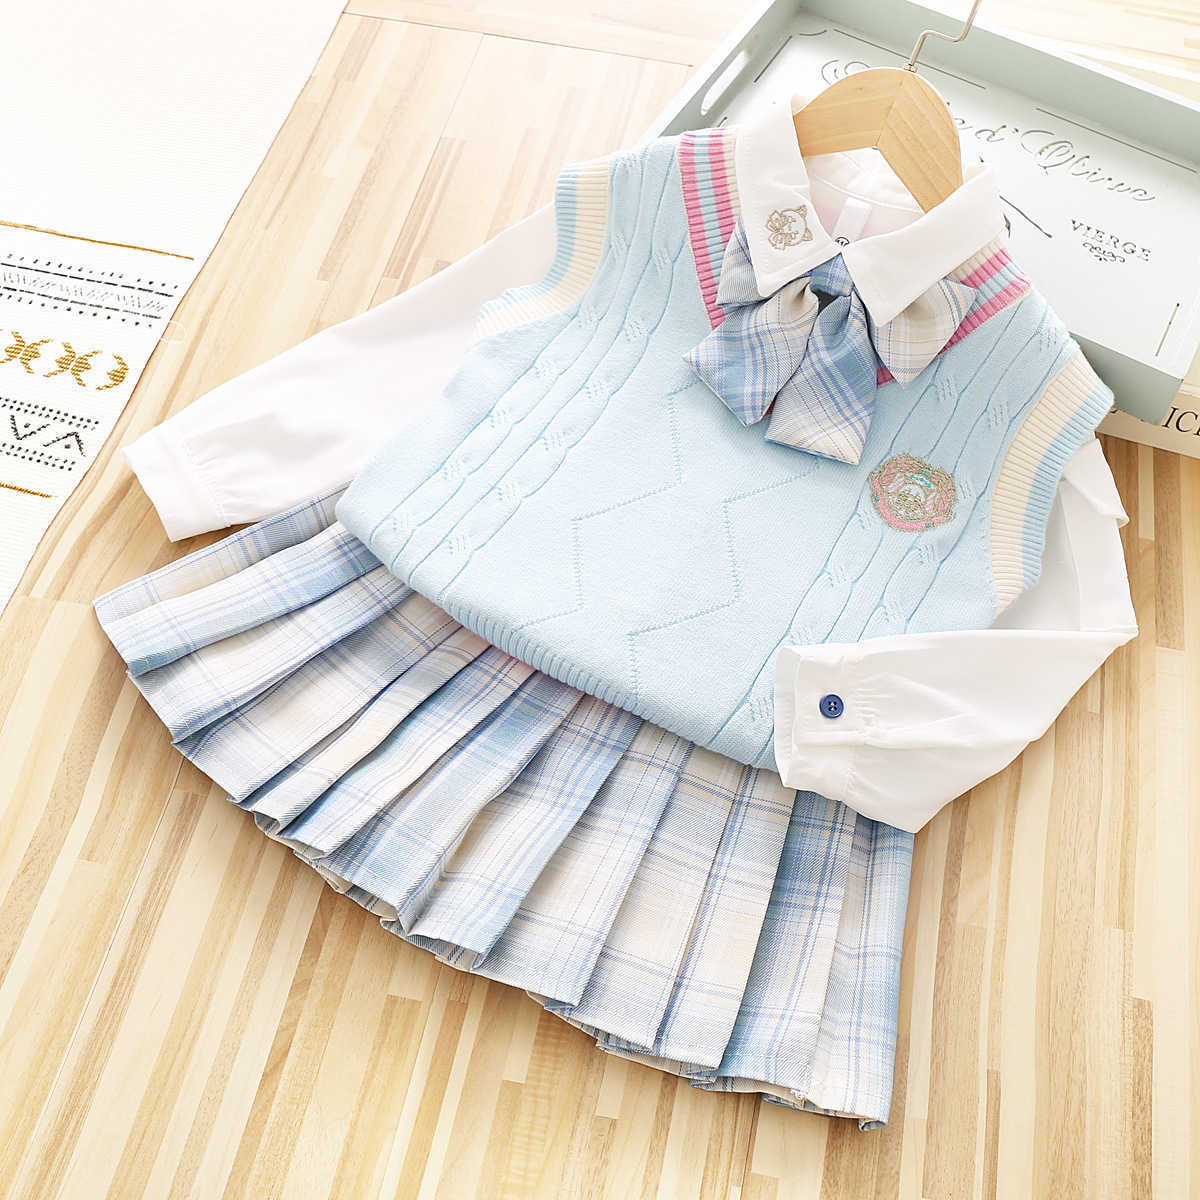 Sets Pieces Pleated Skirt Boutique Kids Clothing Set Girls JK College Style Suit Autumn Winter New Sweater Vest Doll Collar Shirt